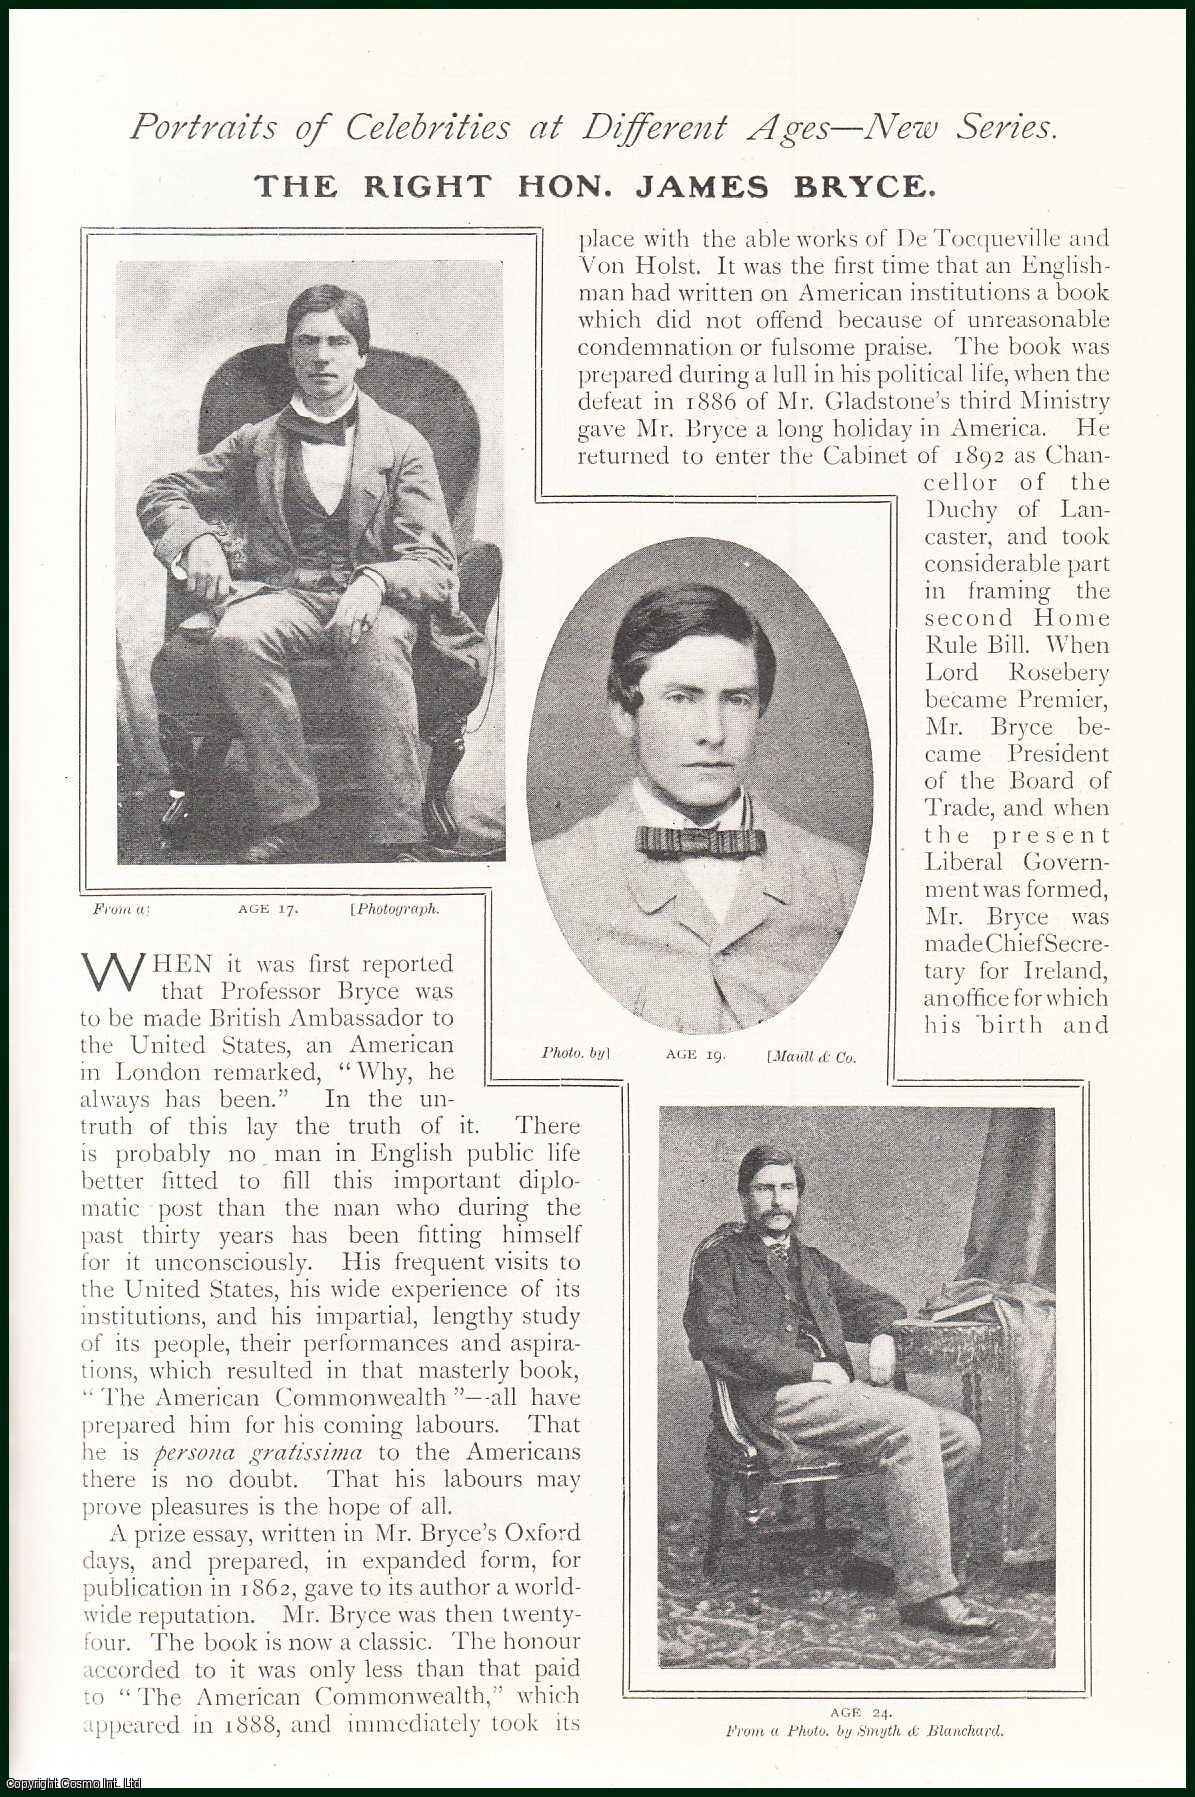 Strand Magazine - The Right Hon. James Bryce. Portraits of Celebrities at Different Ages. An original article from The Strand Magazine, 1907.